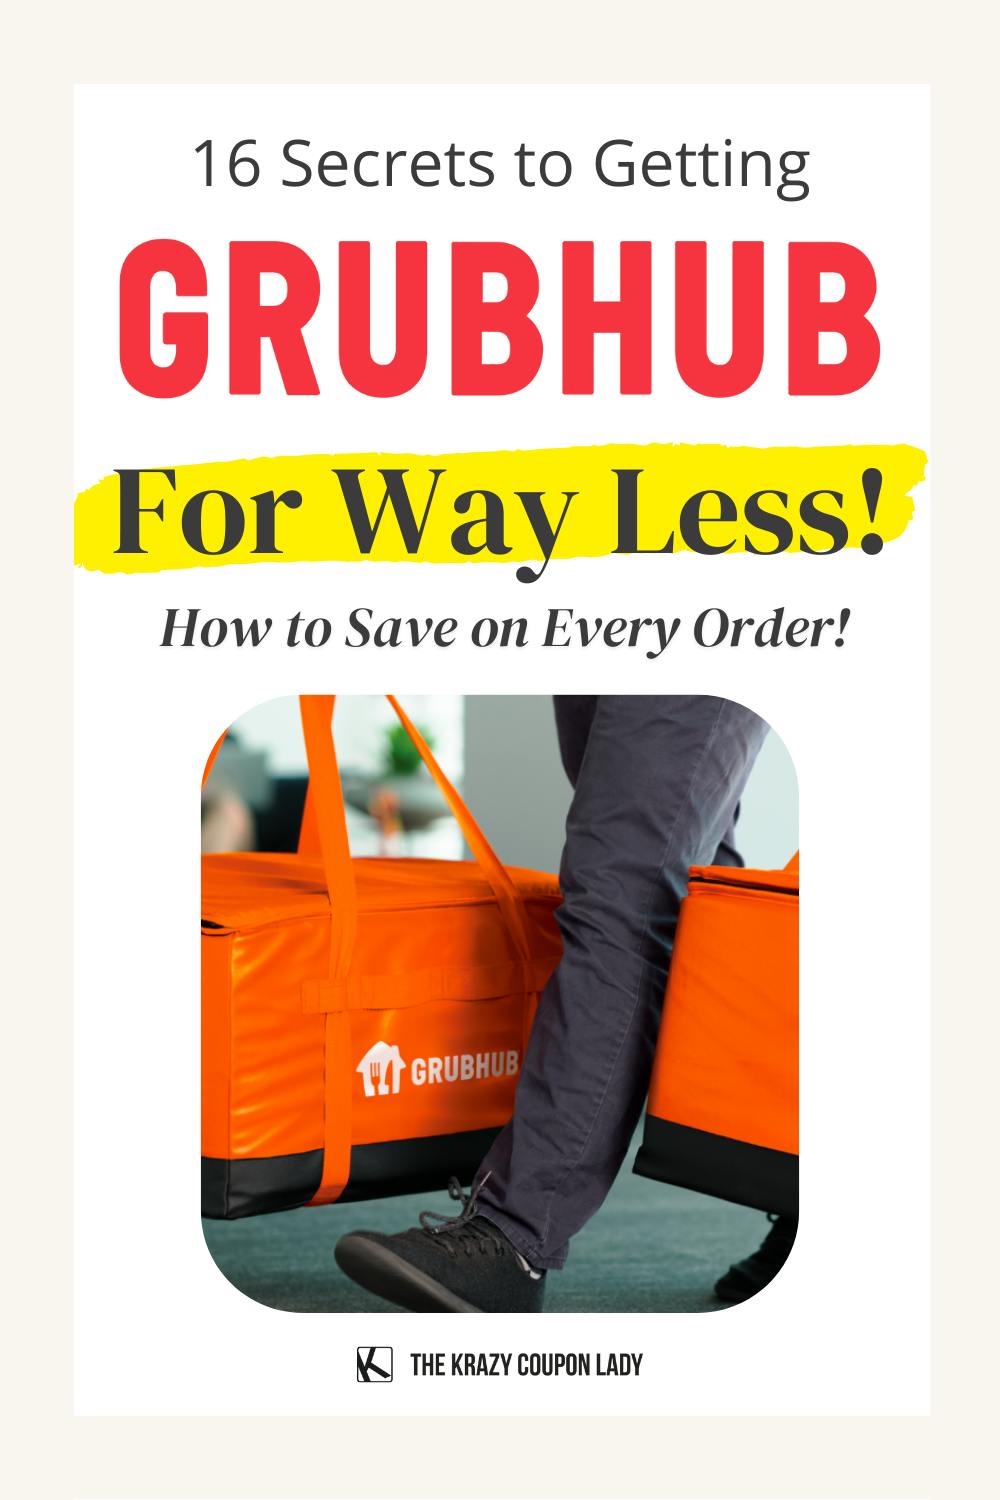 How Does Grubhub Work? 16 Secrets to Getting Cheap Delivery